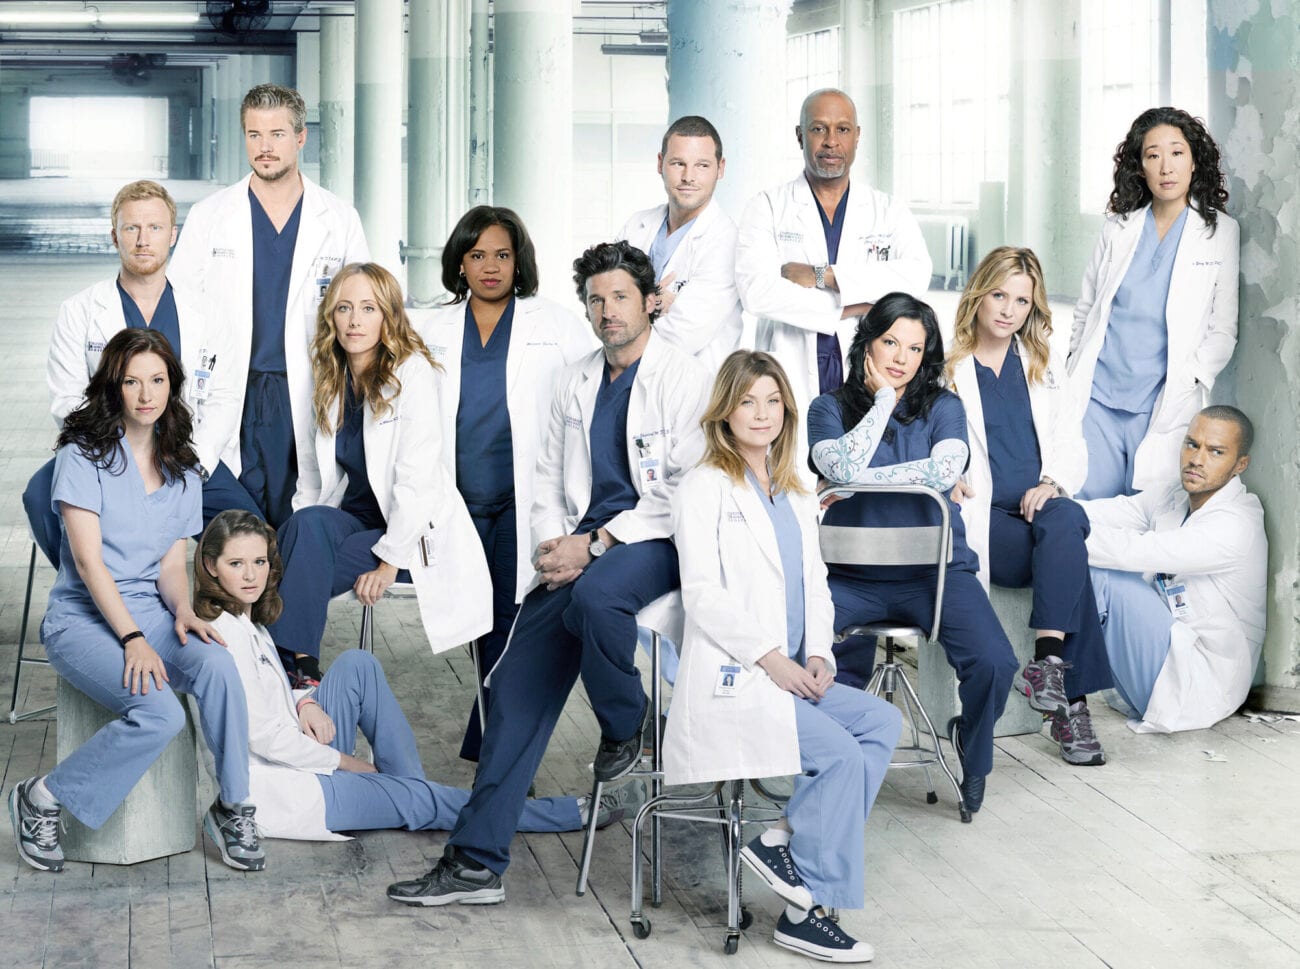 Just how many more seasons will 'Grey's Anatomy' continue to air? After recent news, it may very well go on forever. How excited are you about season 18?